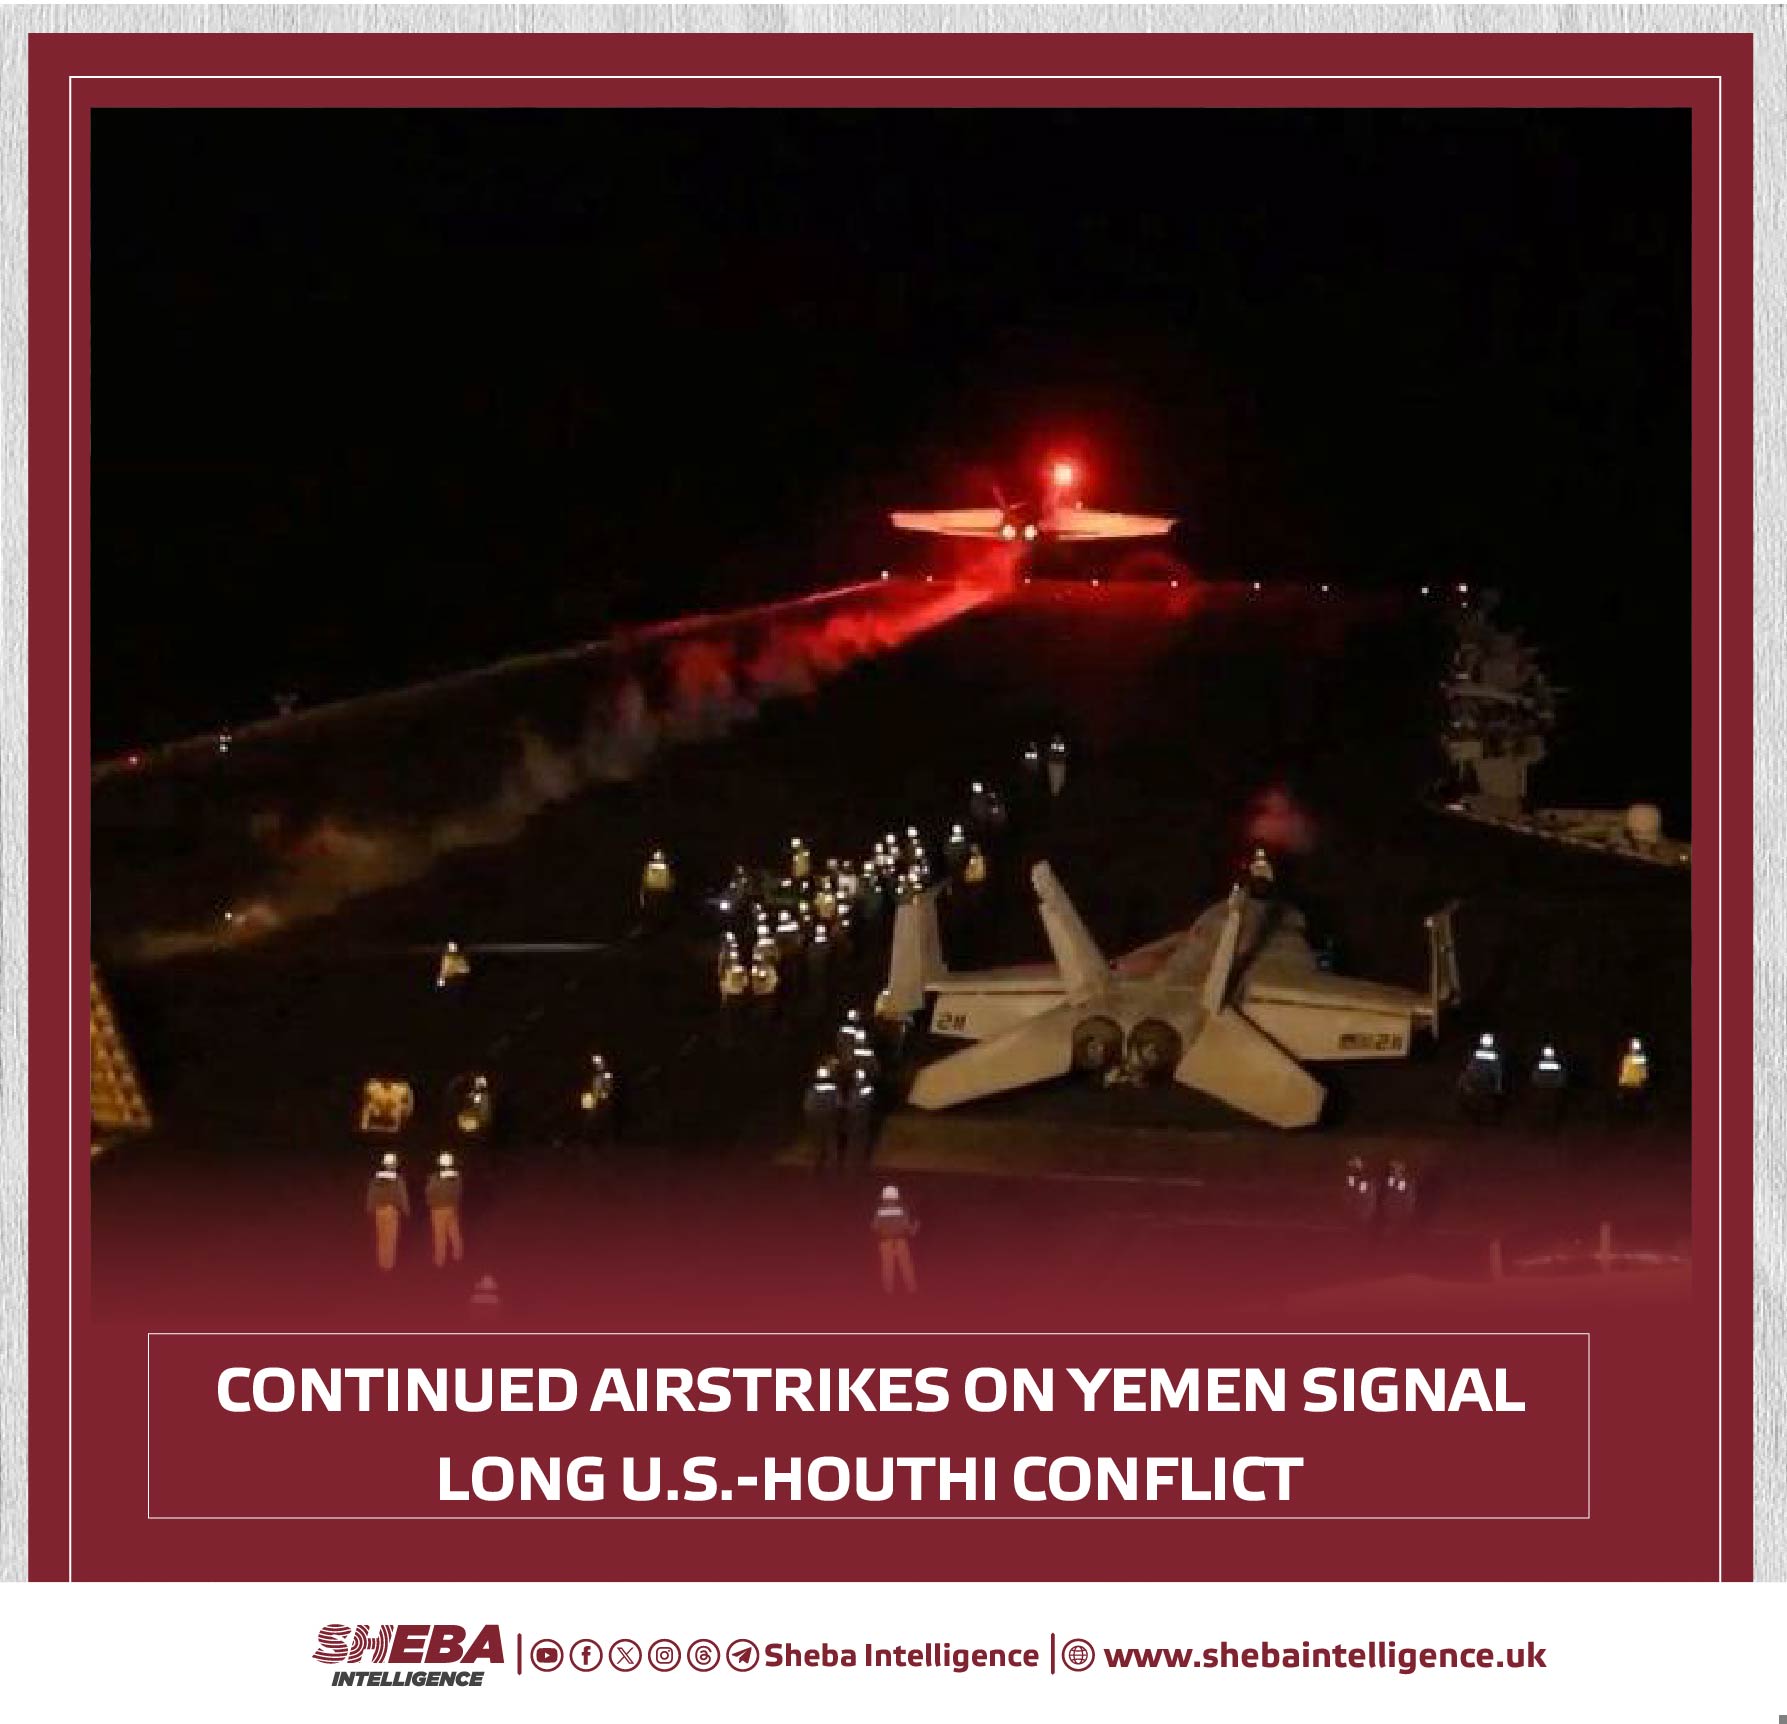 Continued Airstrikes on Yemen Signal Long U.S.-Houthi Conflict